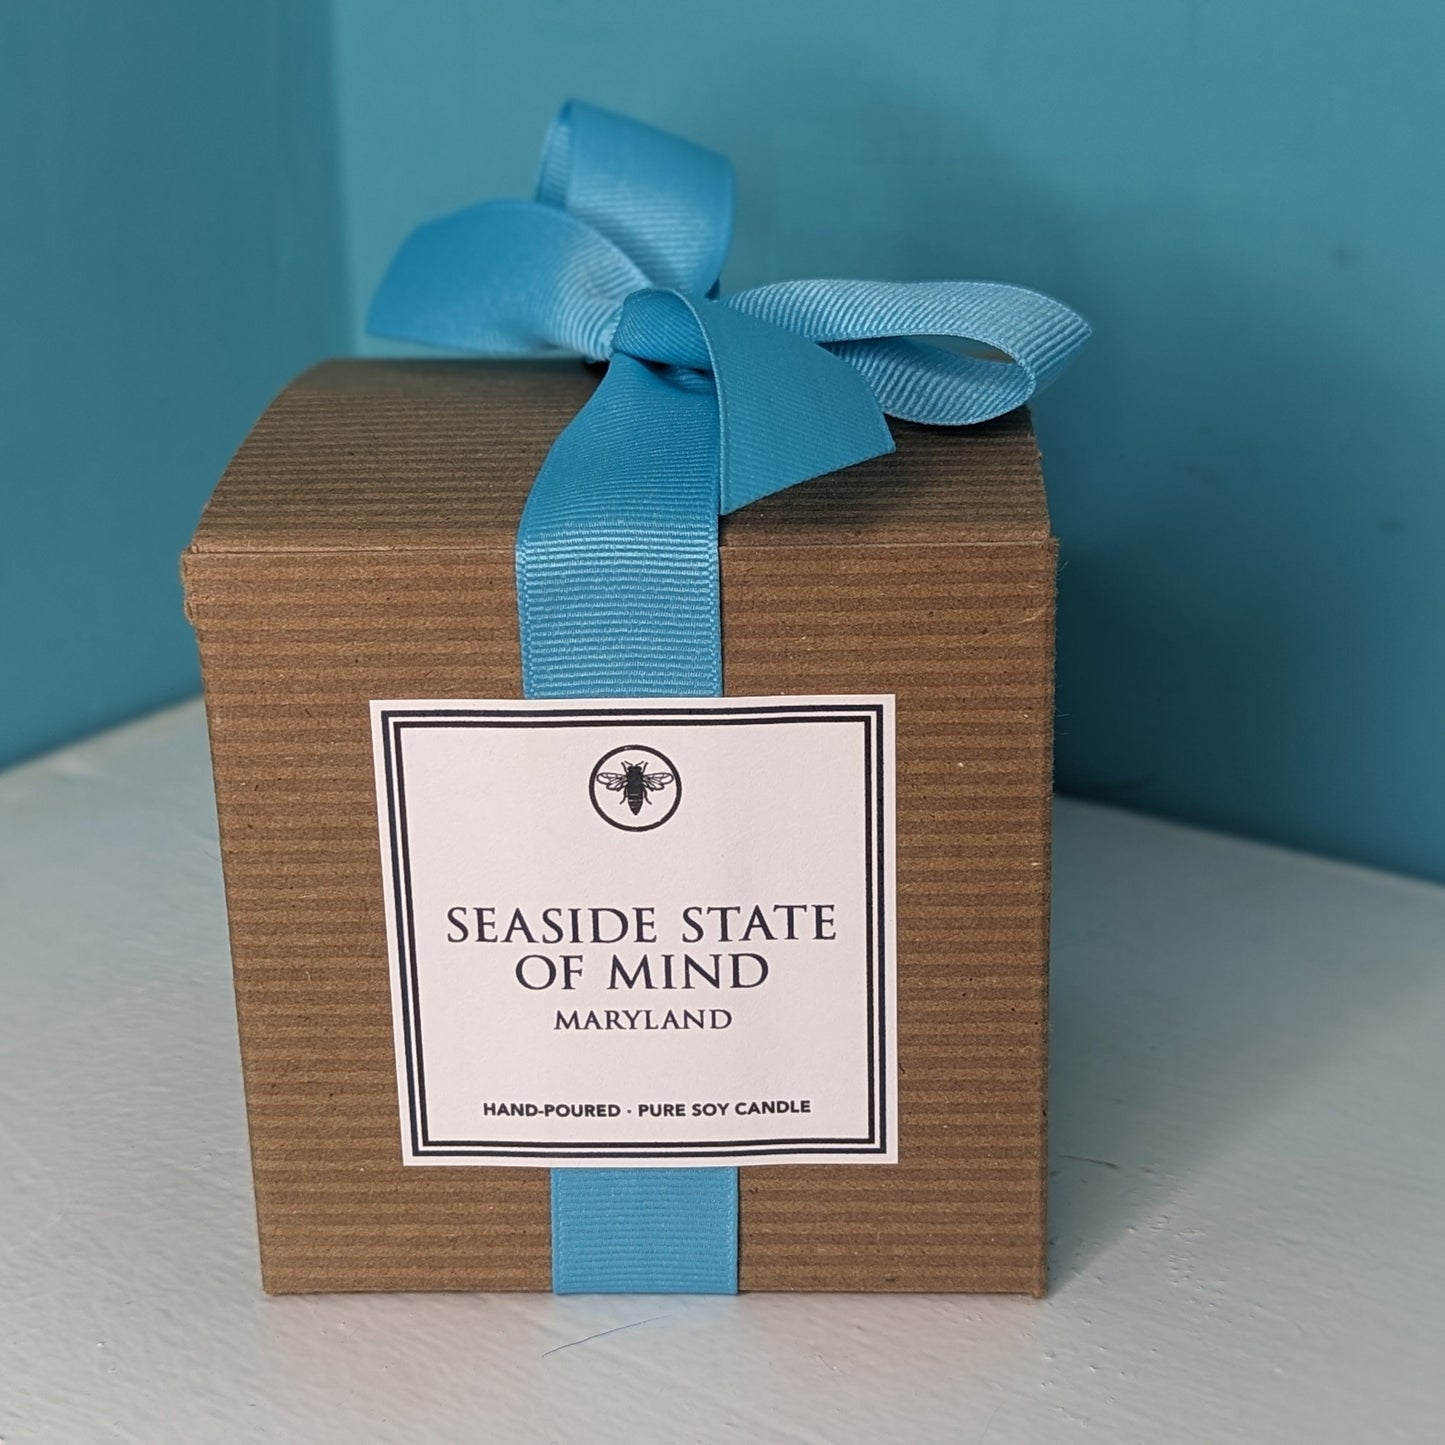 Seaside State of Mind Coconut hand-poured pure soy candle. Wood Bark and Amber. 60hr Burn. Shop at The Painted Cottage in Edgewater, MD